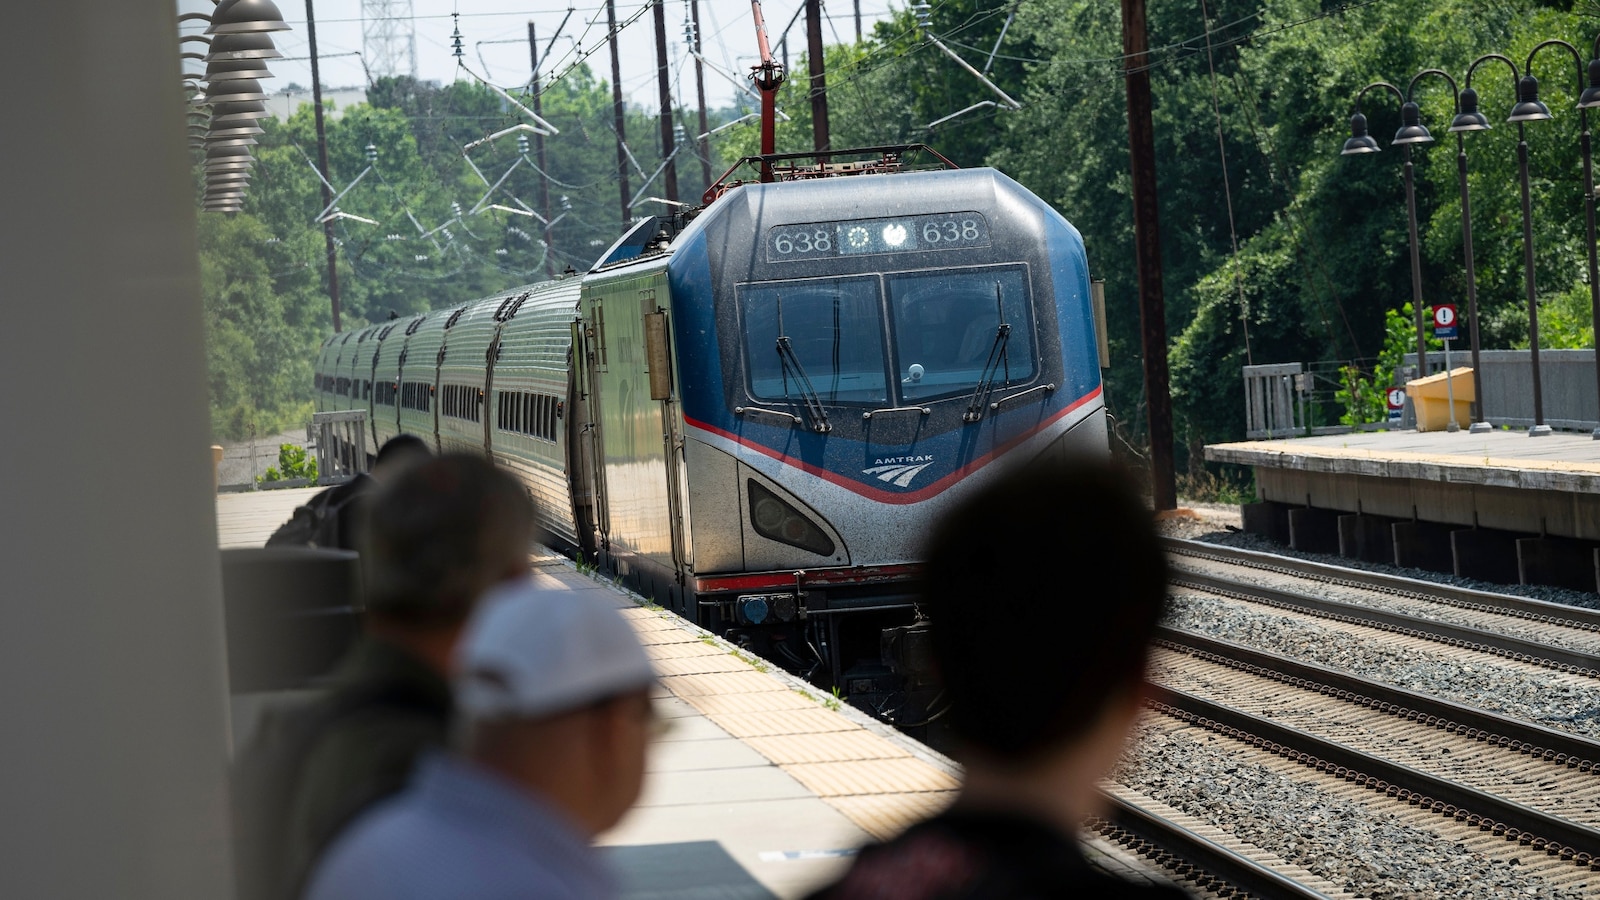 Amtrak service temporarily suspended between Philadelphia and Connecticut